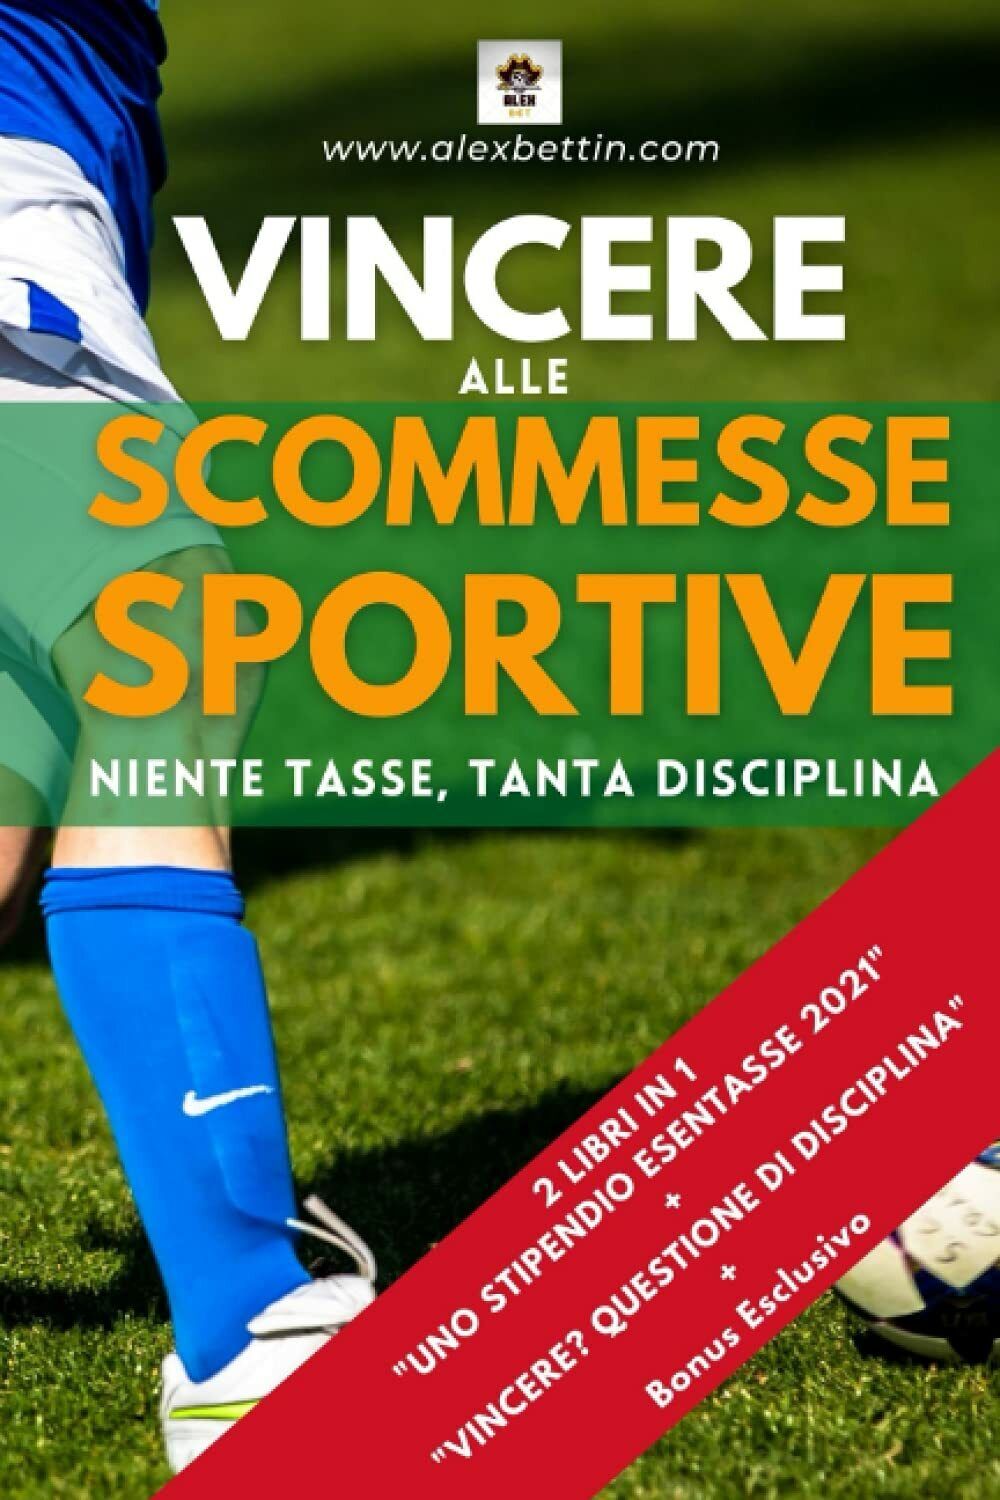 Vincere alle Scommesse Sportive - ALEXBETTIN - Independently published - 2021